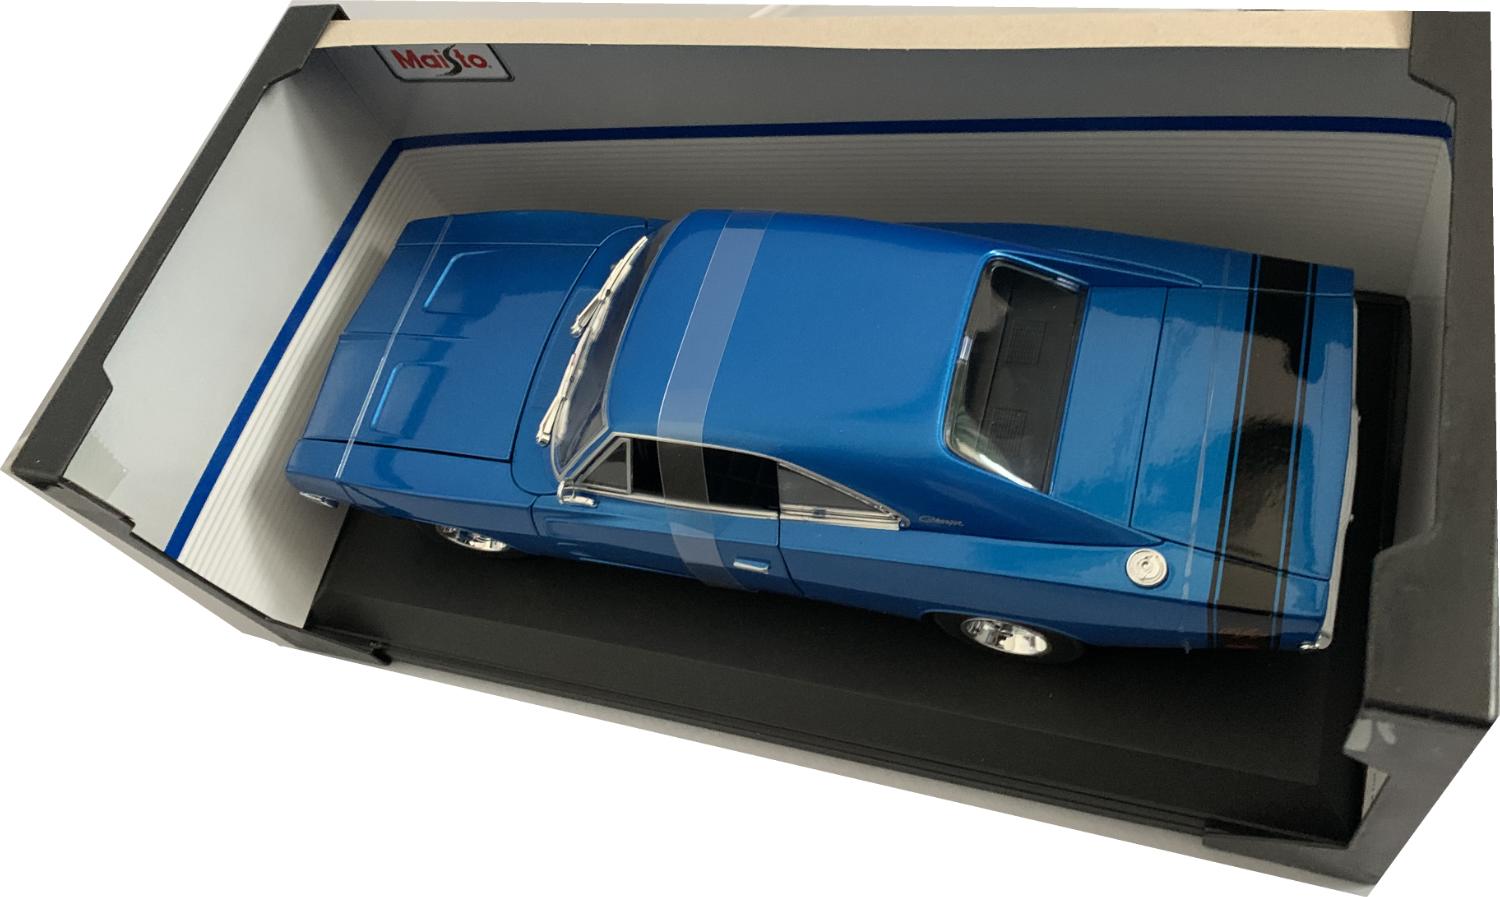 Dodge Charger R/T 1969 in metallic blue 1:18 scale model from Maisto